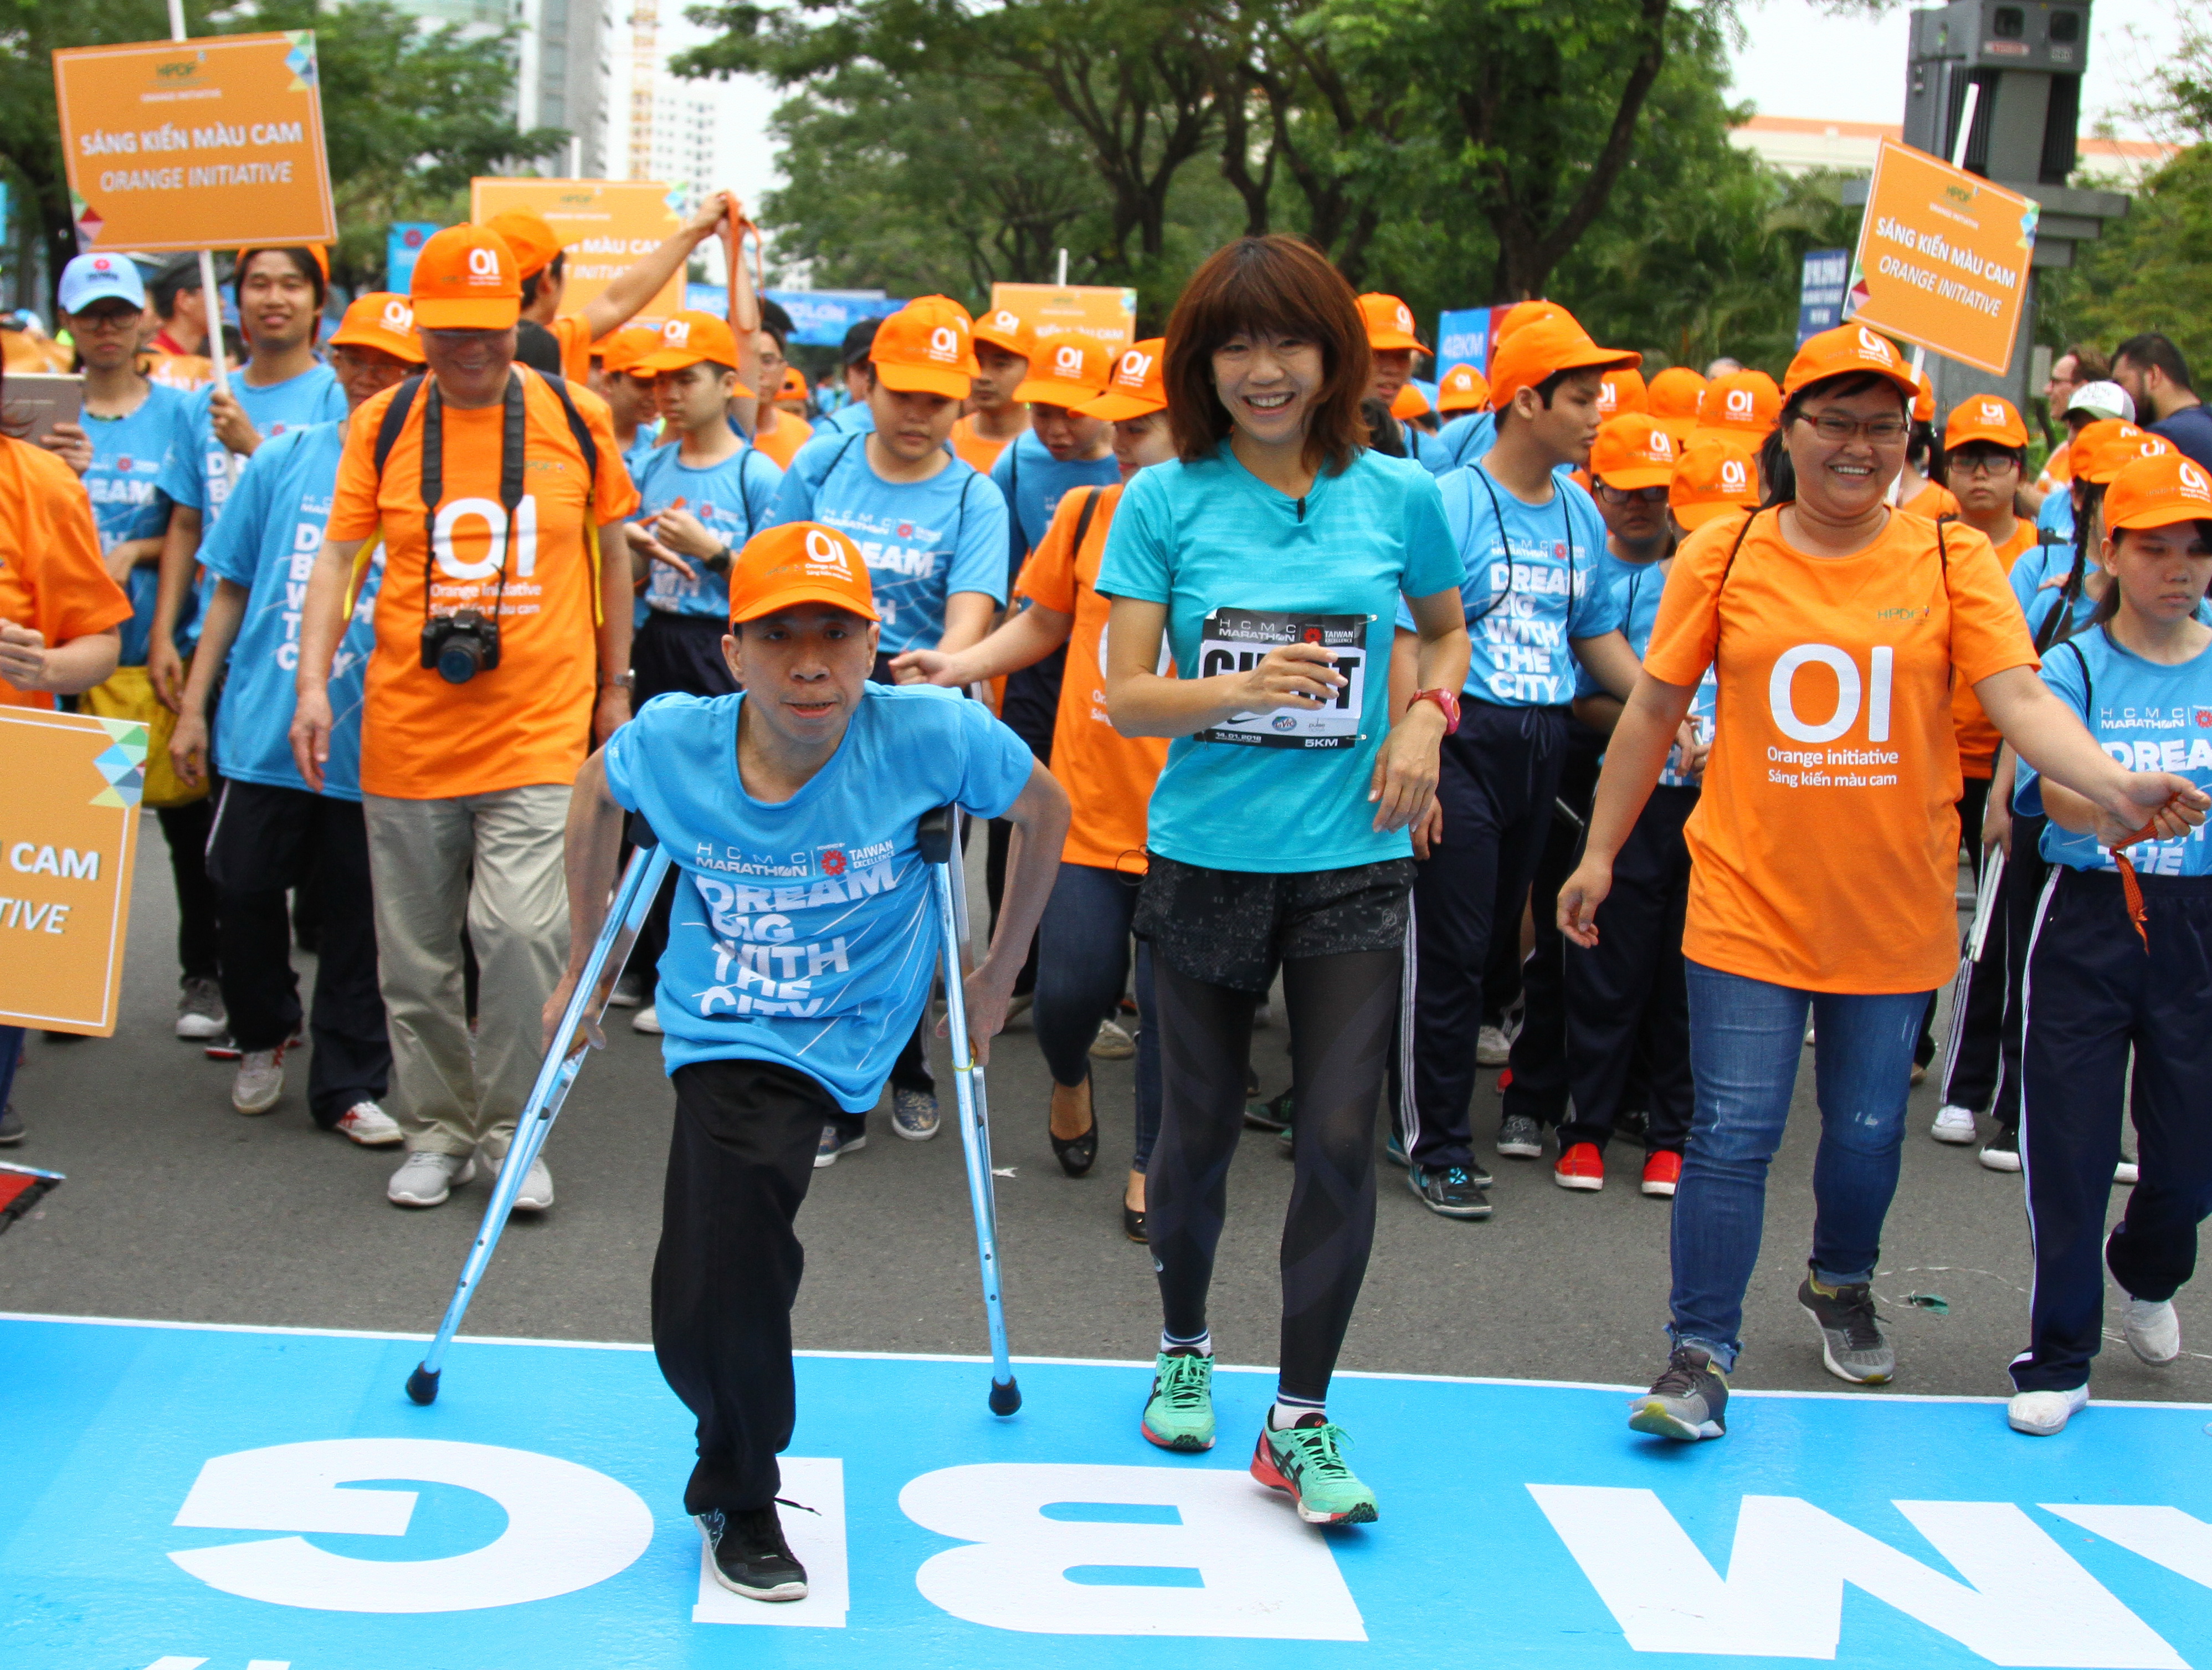 ​Over 8,000 join int’l marathon event in Ho Chi Minh City